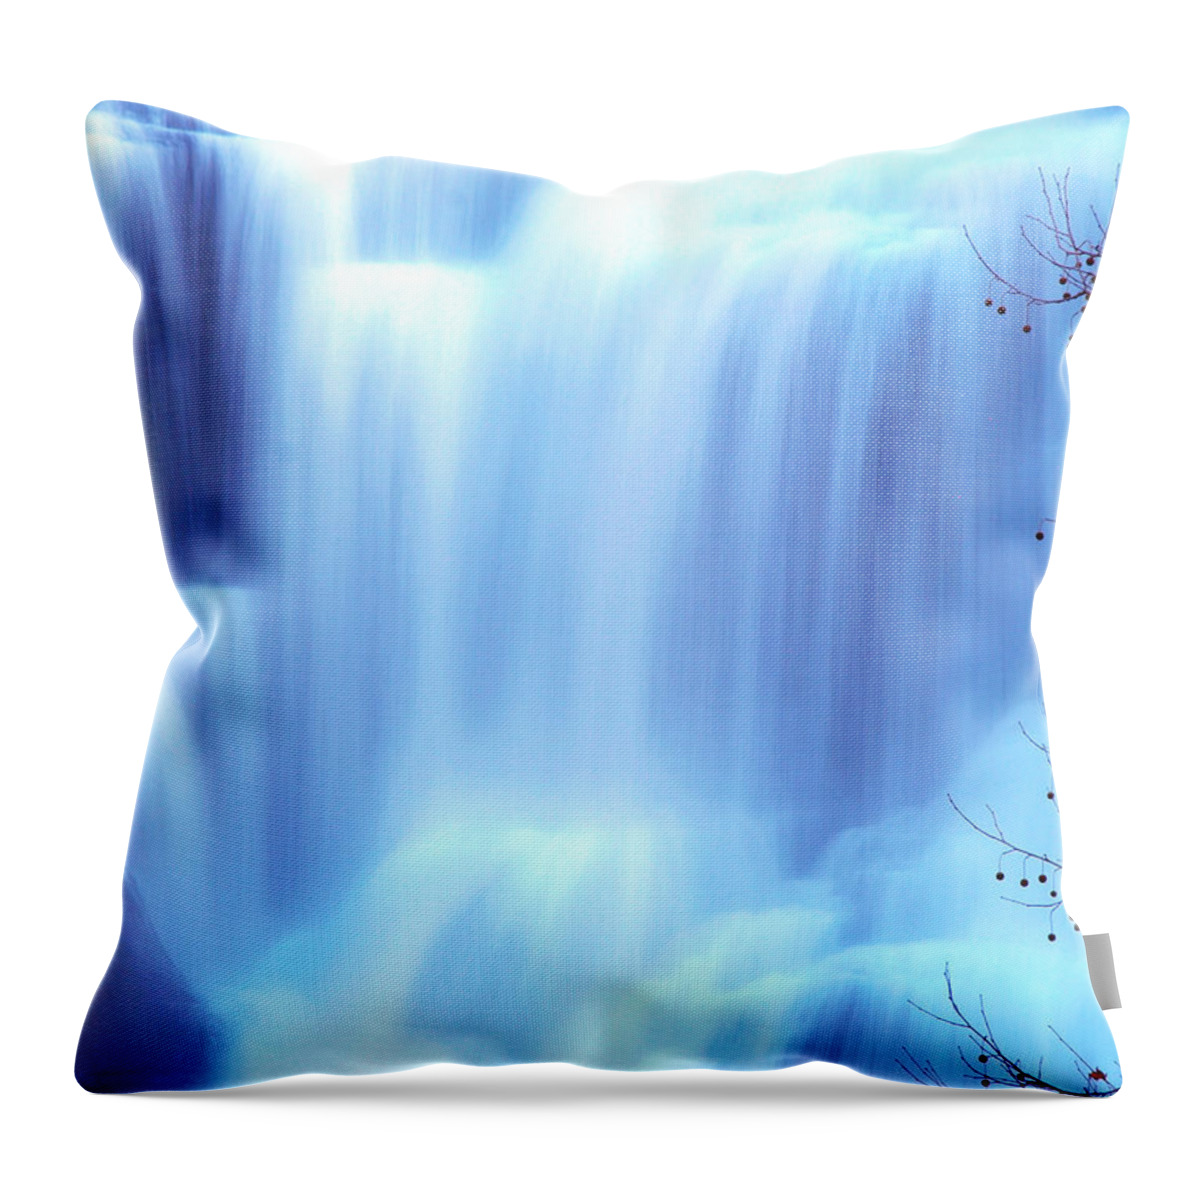 Ithaca Throw Pillow featuring the photograph Ithaca Water Falls New York by Paul Ge